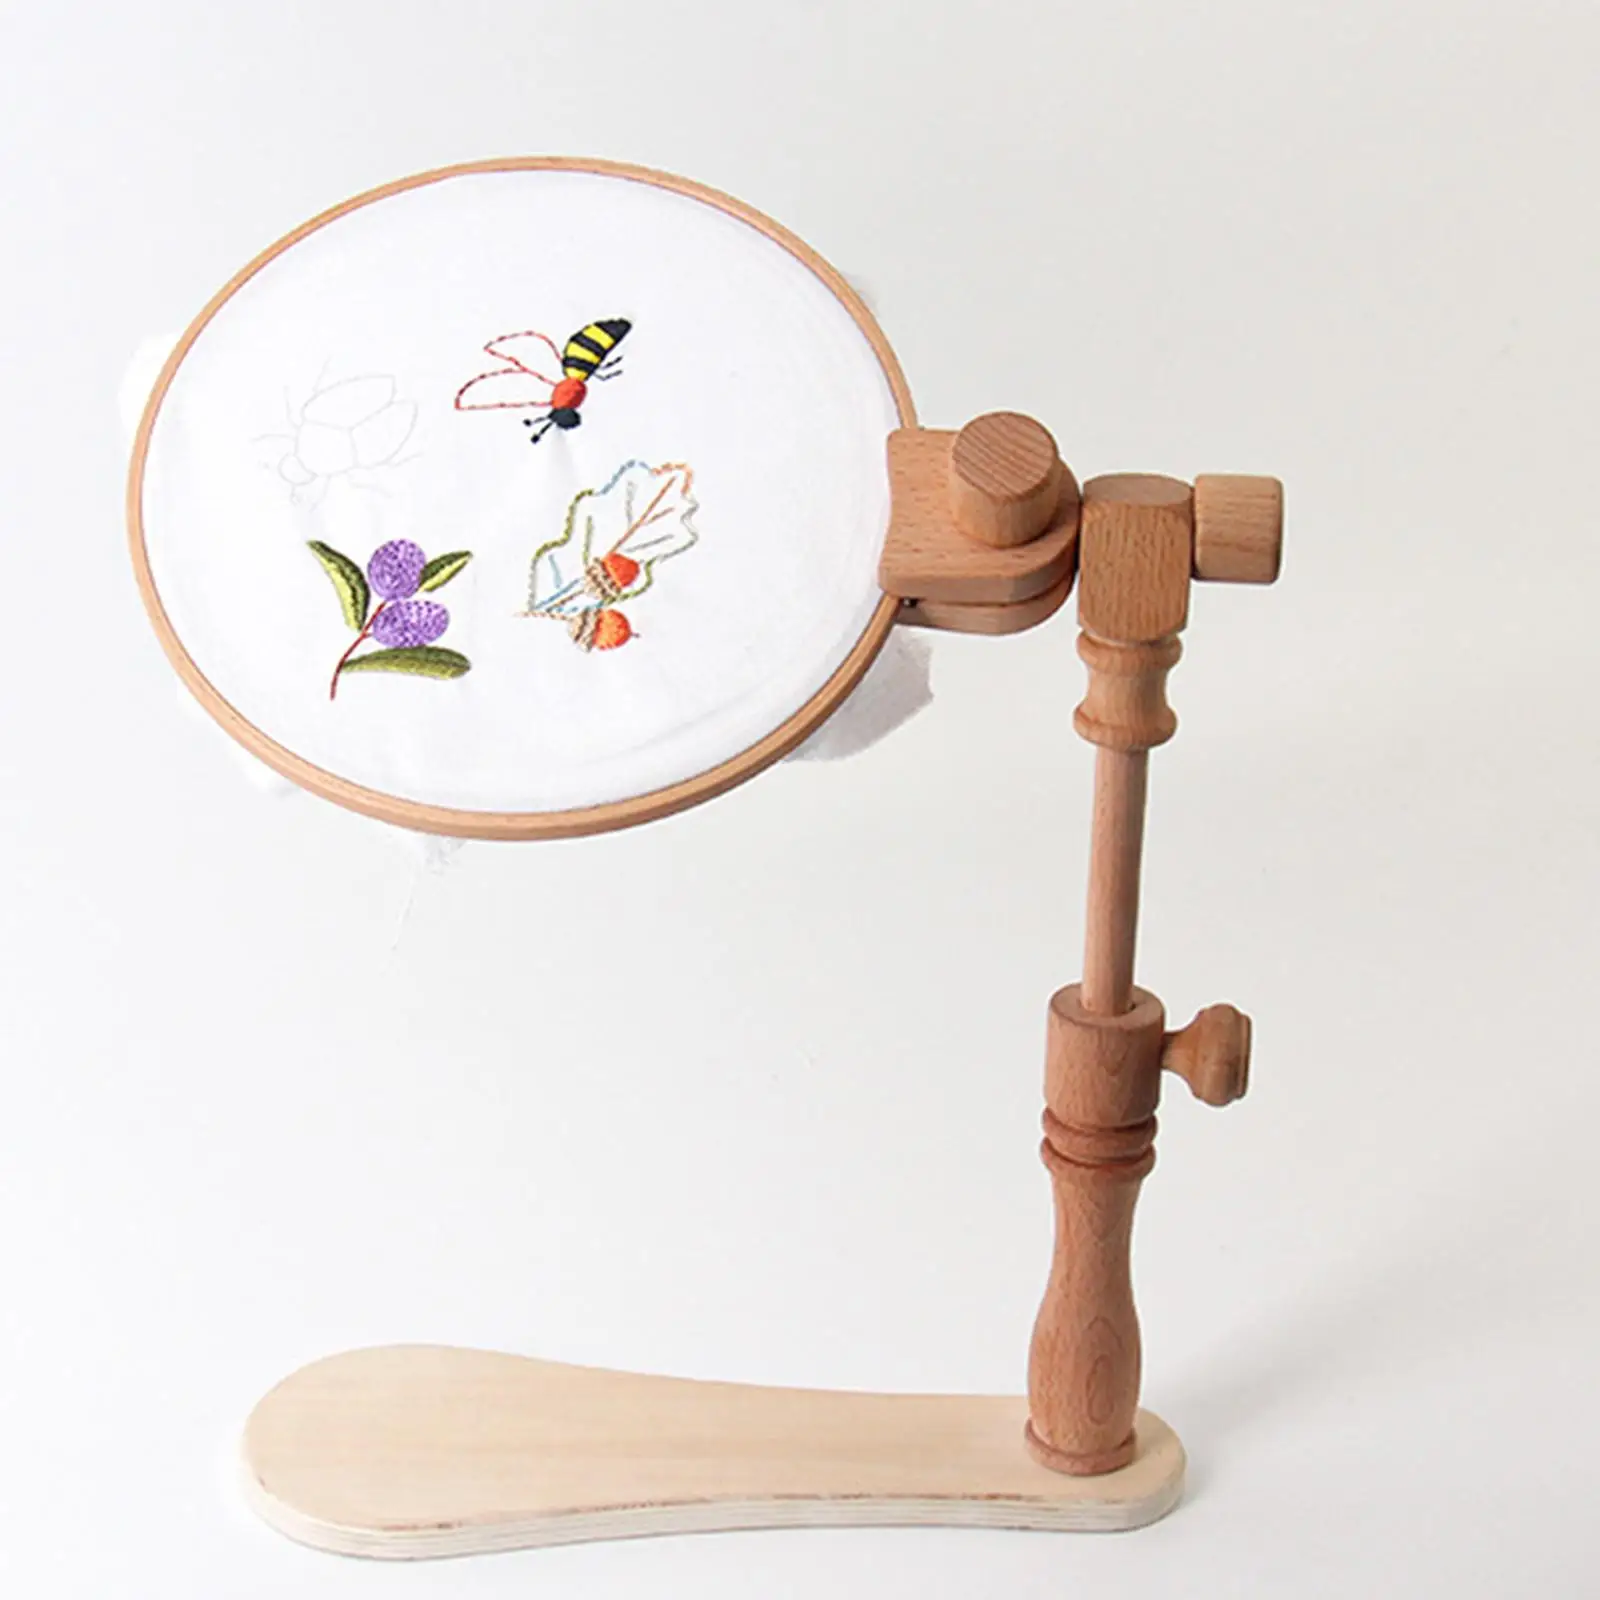 Embroidery Hoop Holder Rack 360 Degree Rotation Embroidery Hoop Stand for Stitch